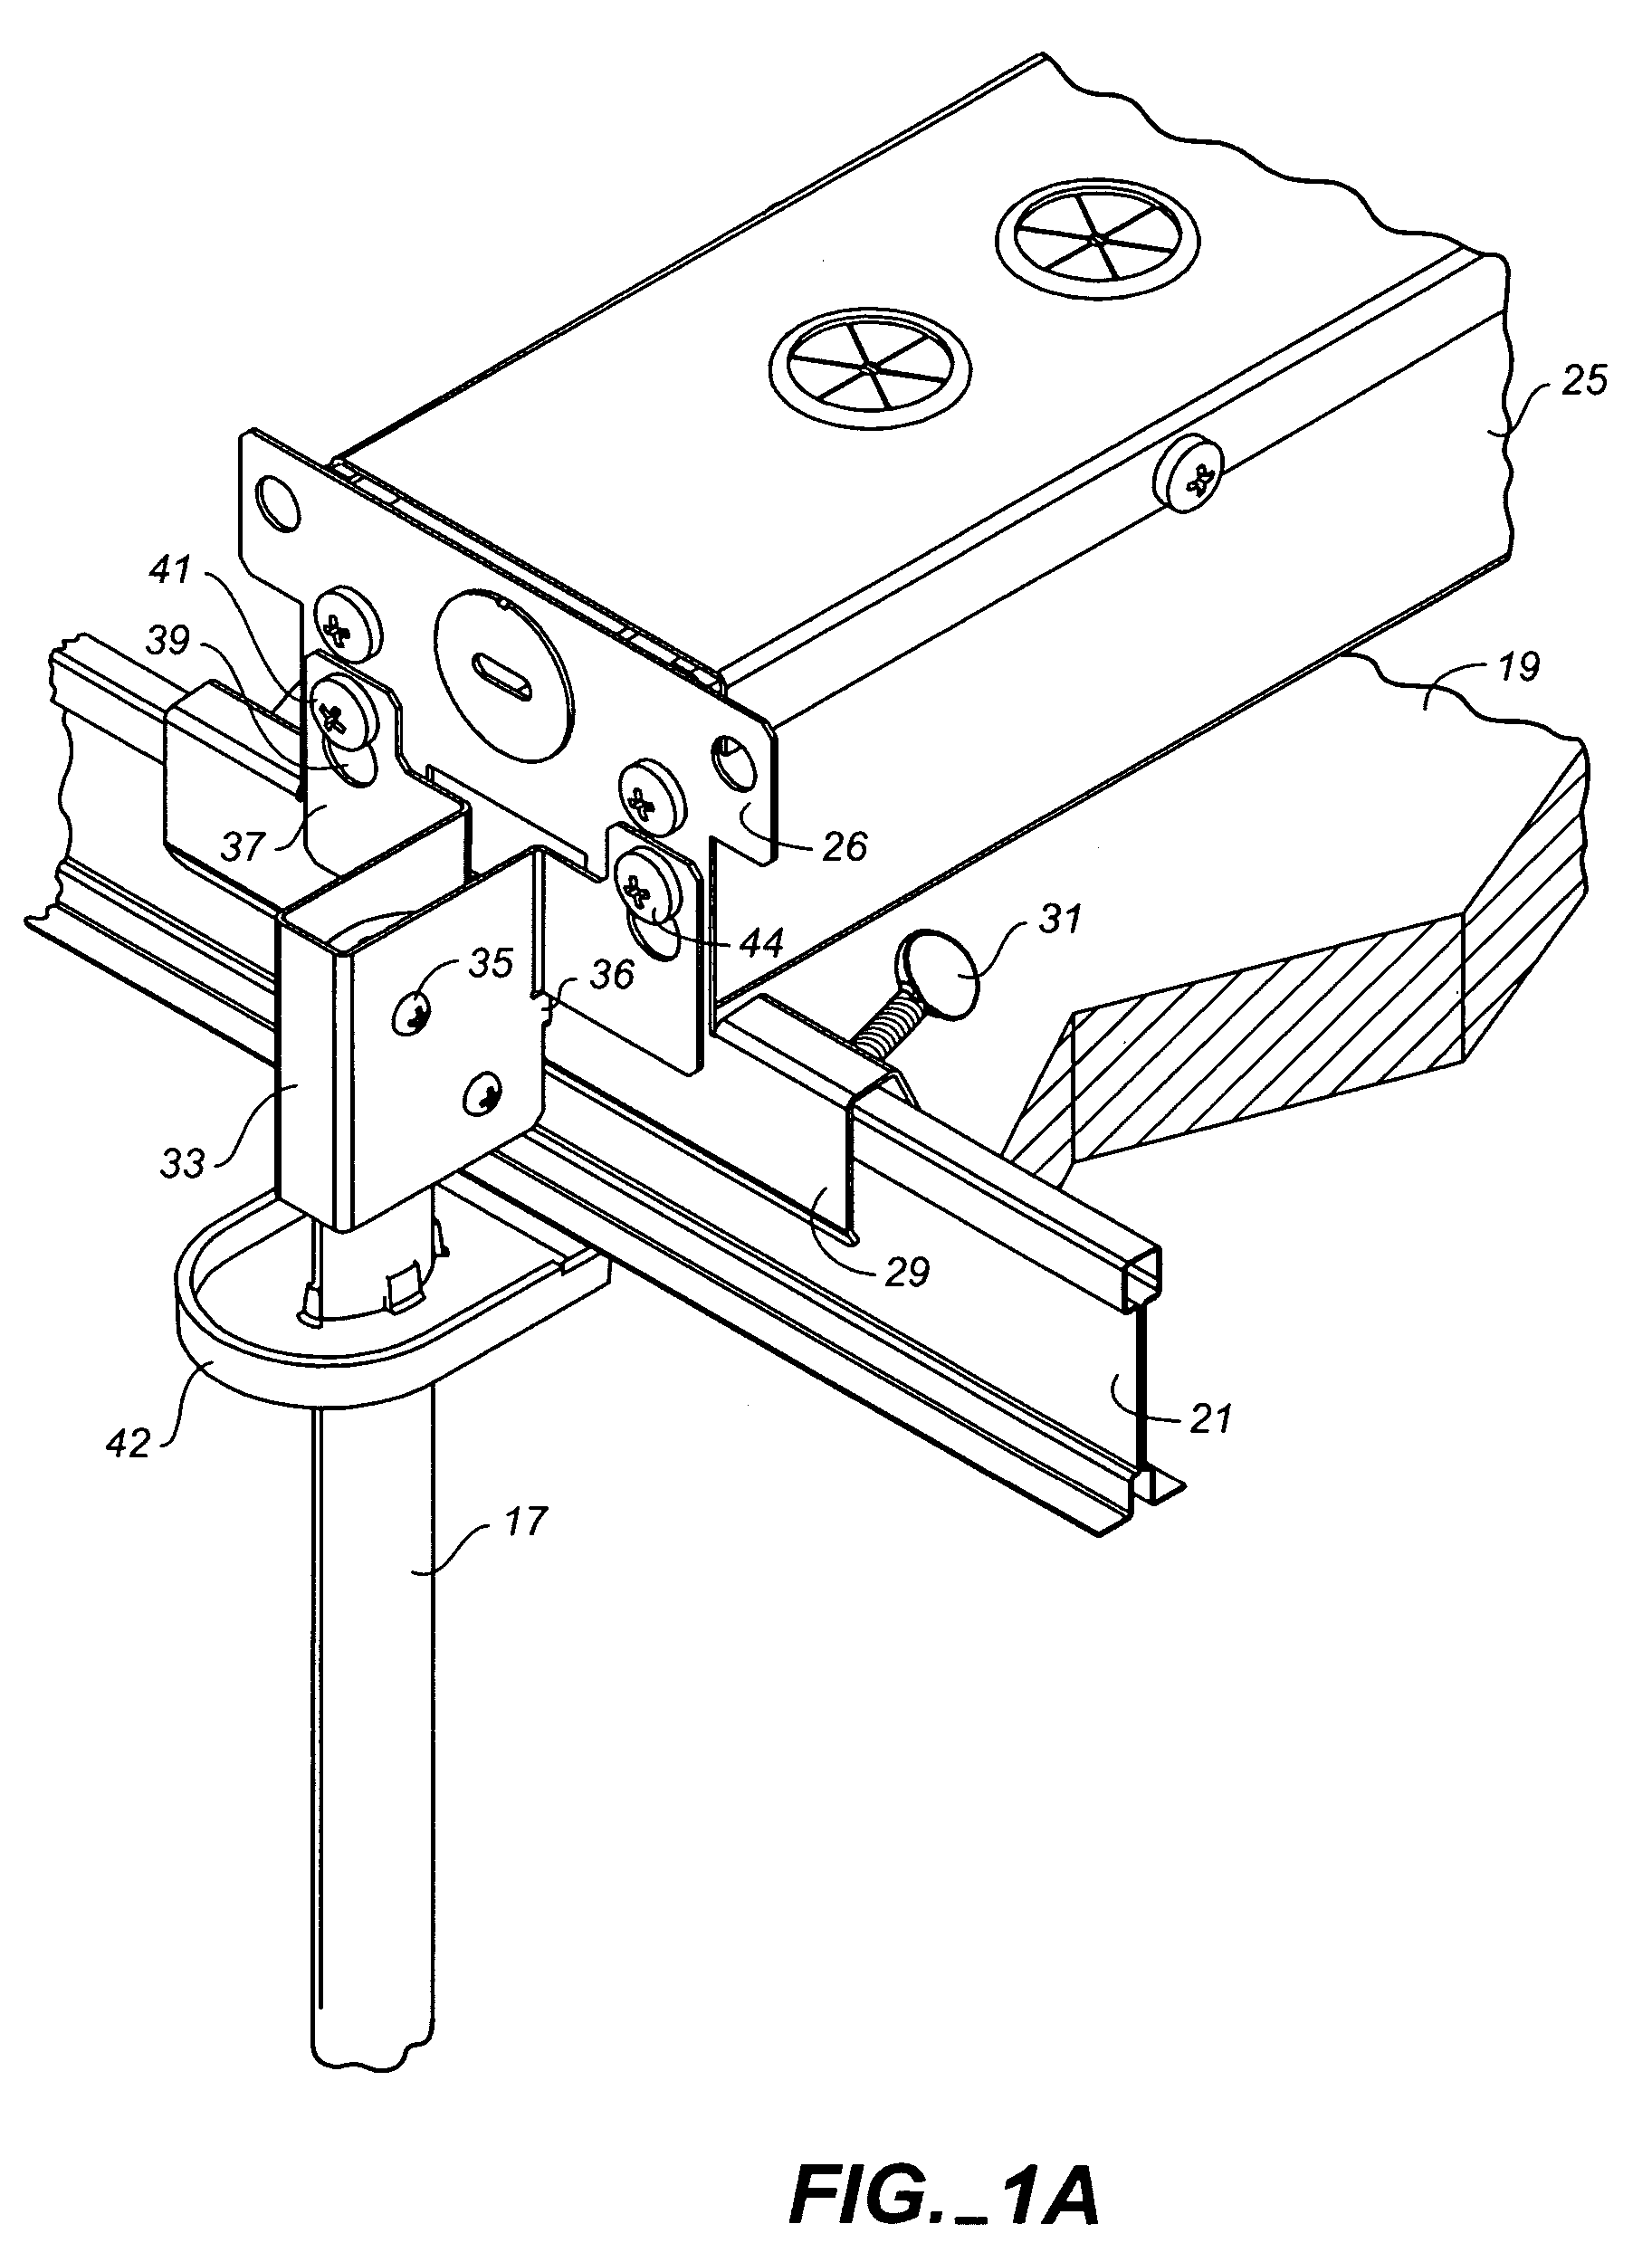 Fluorescent lighting fixture module for indirect lighting of interior spaces, and method